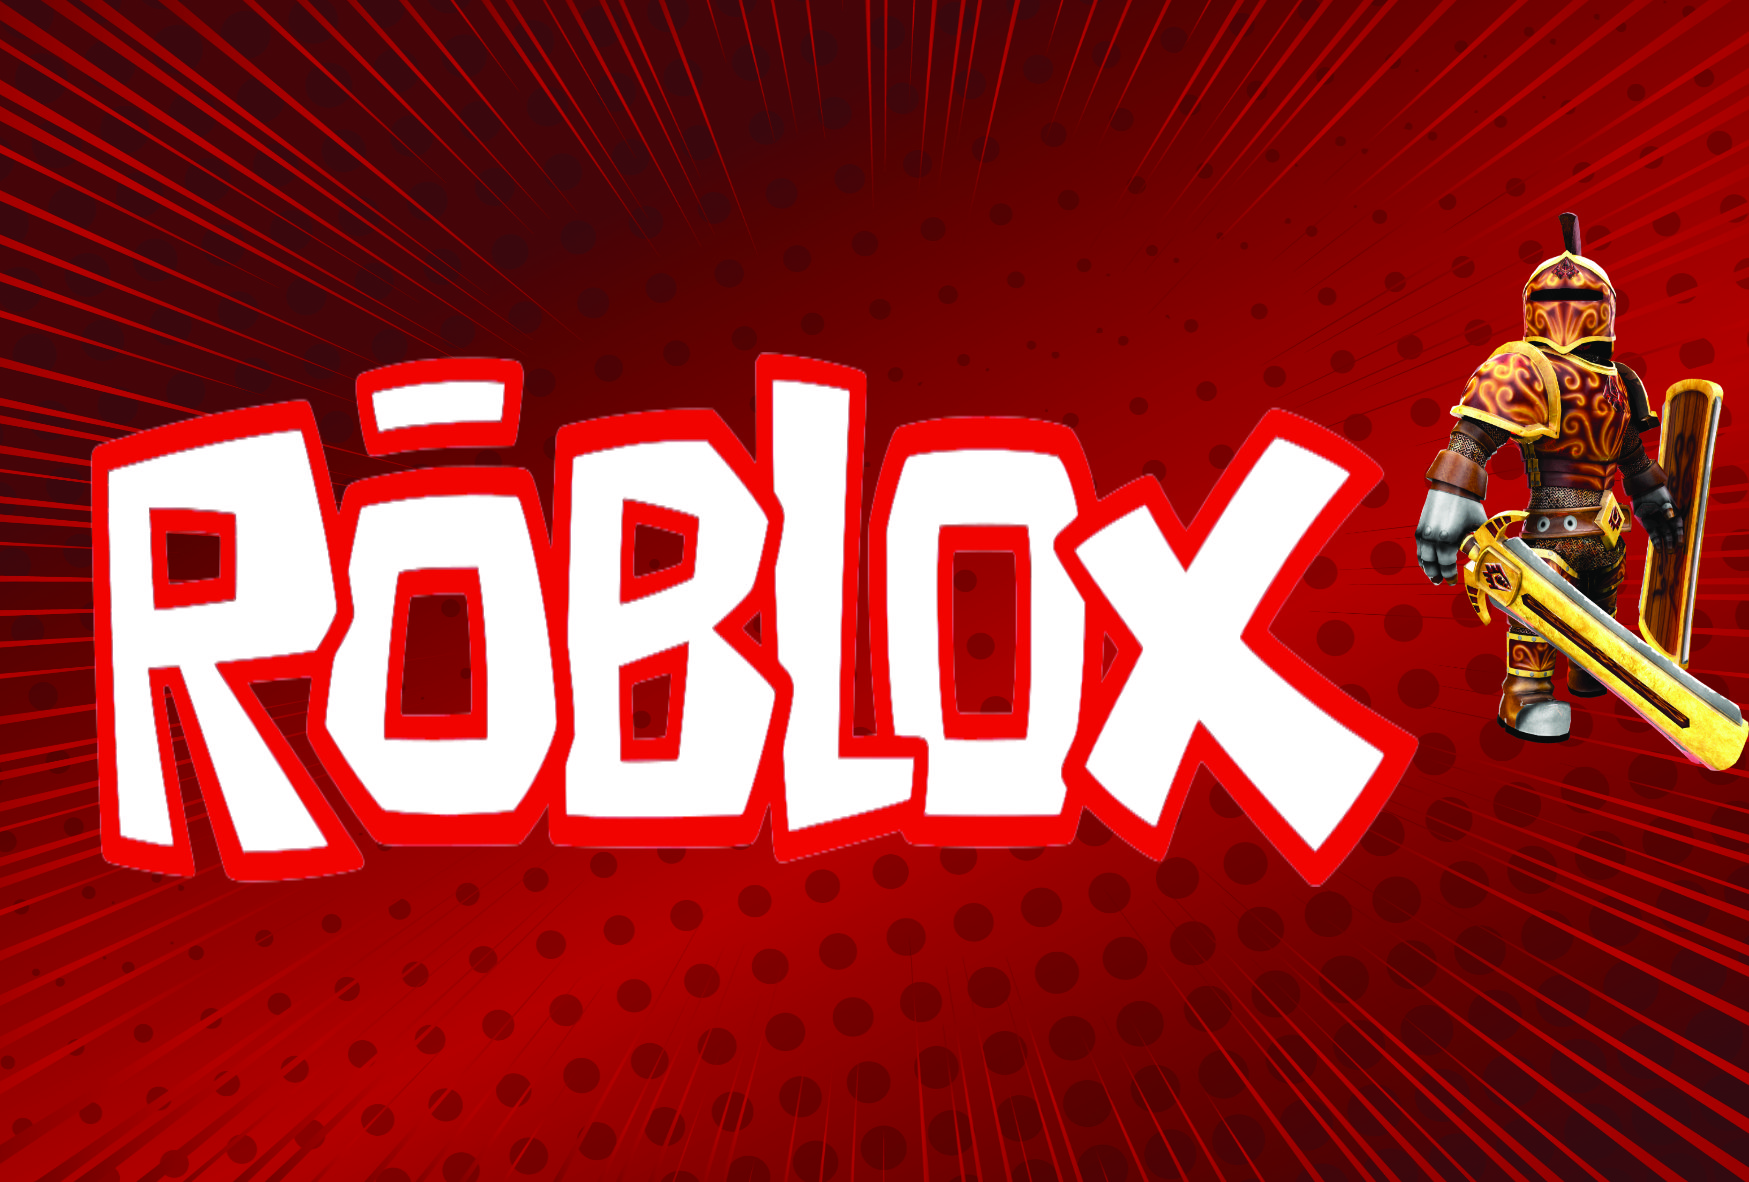 What Parents need to know about ROBLOX